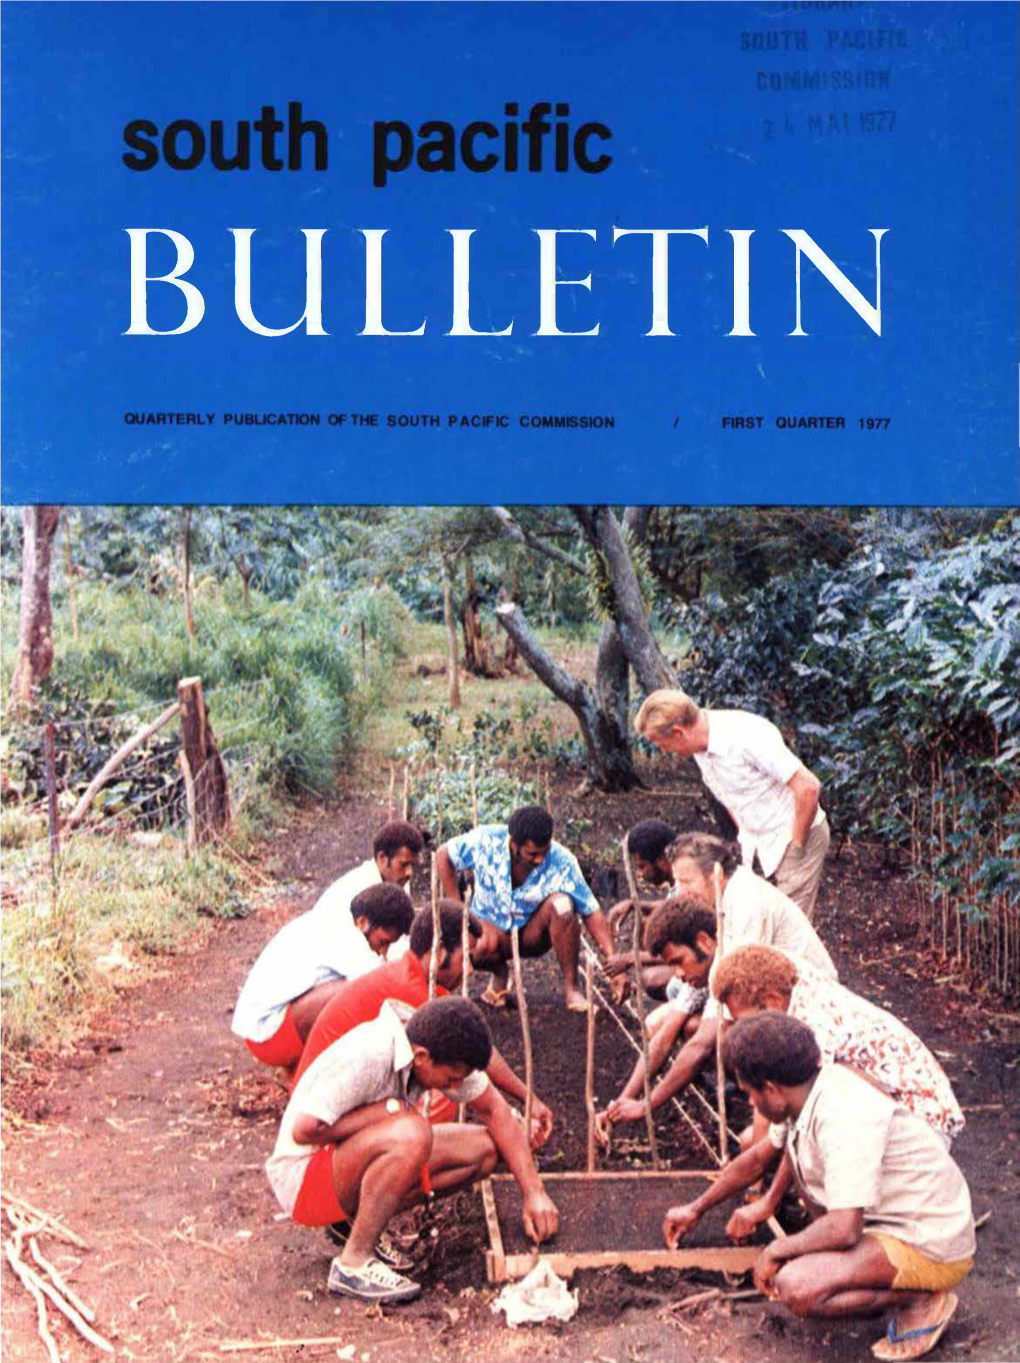 QUARTERLY PUBLICATION of the SOUTH PACIFIC Commissiol FIRST QUARTER 1977 Every Day of the Week, a Whole Flock from Nadi